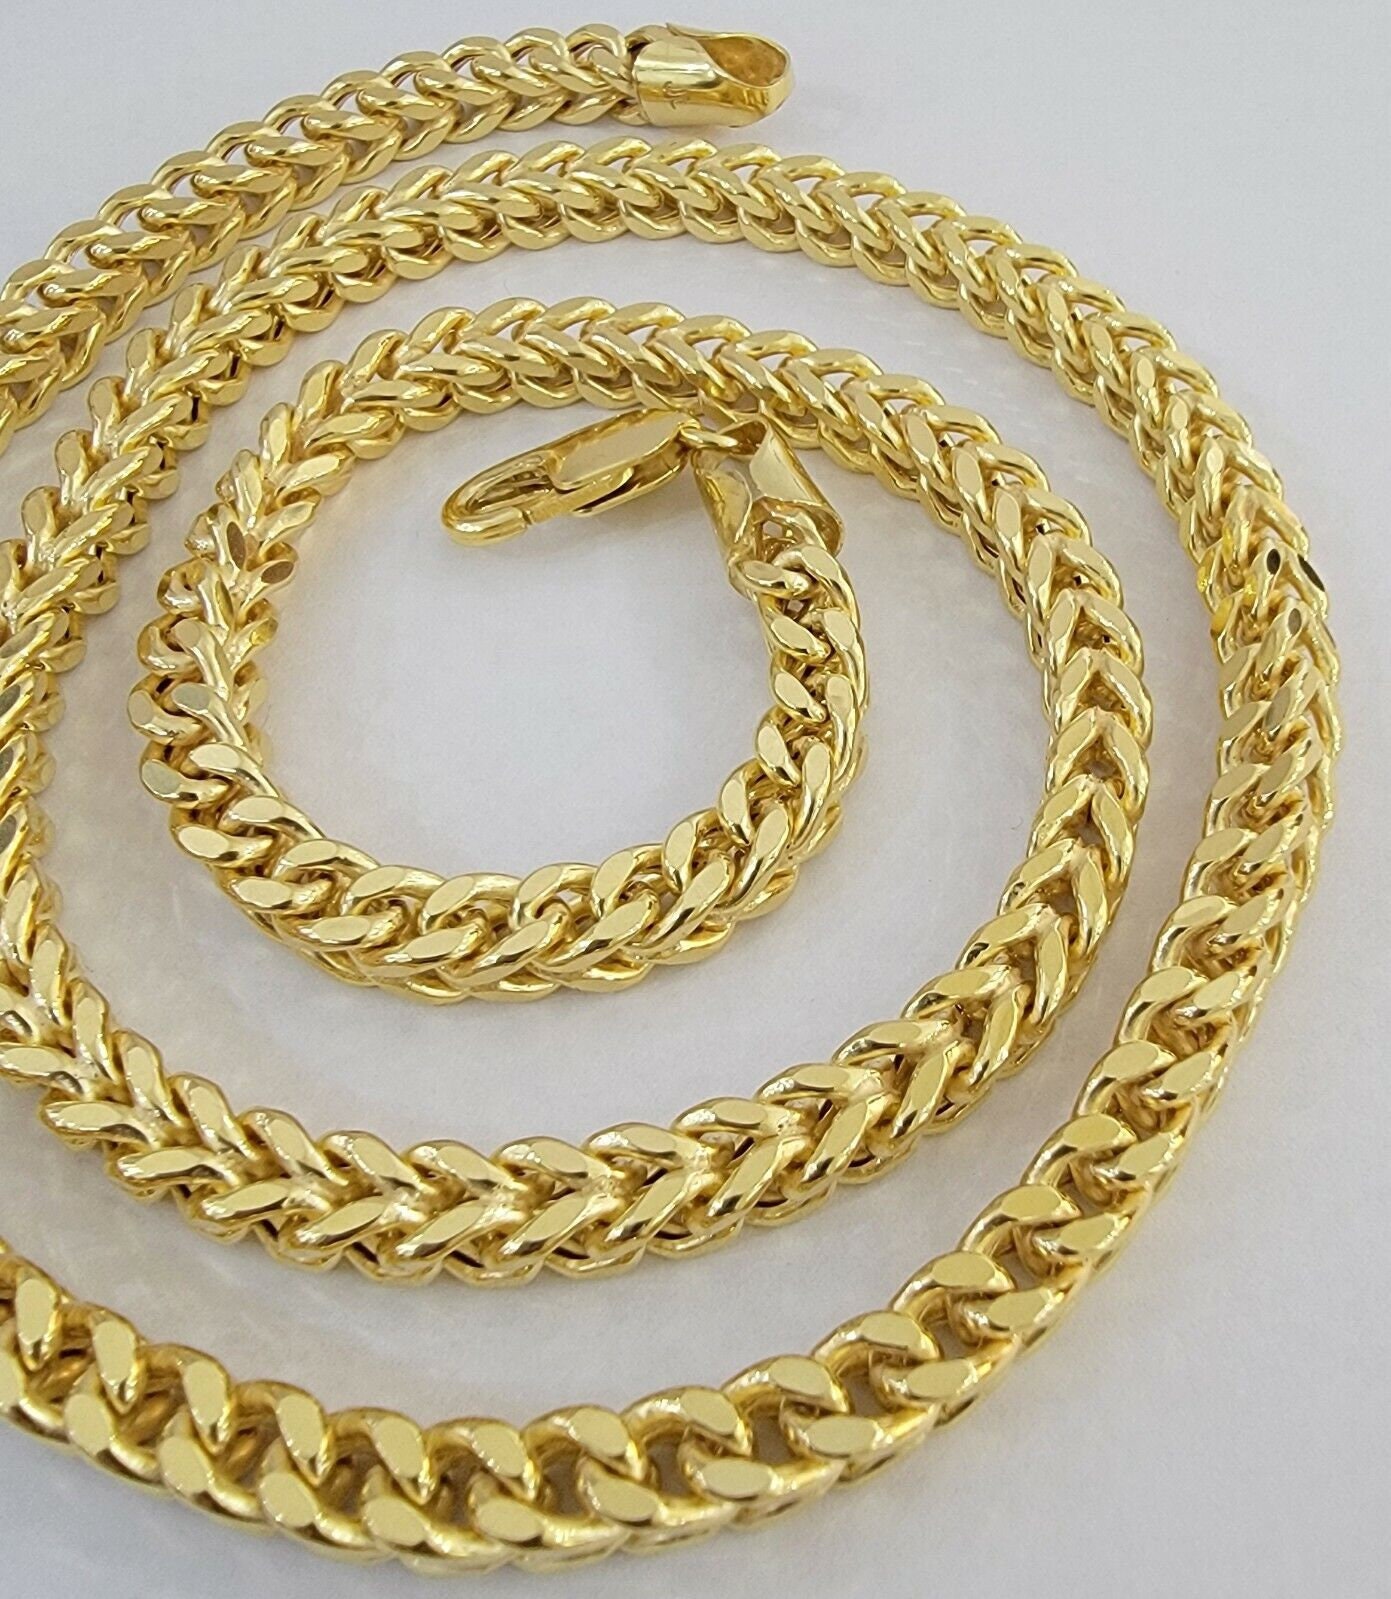 Buy 10k Solid Yellow Gold Small Tight Link Franco Chain 20-26 Inch